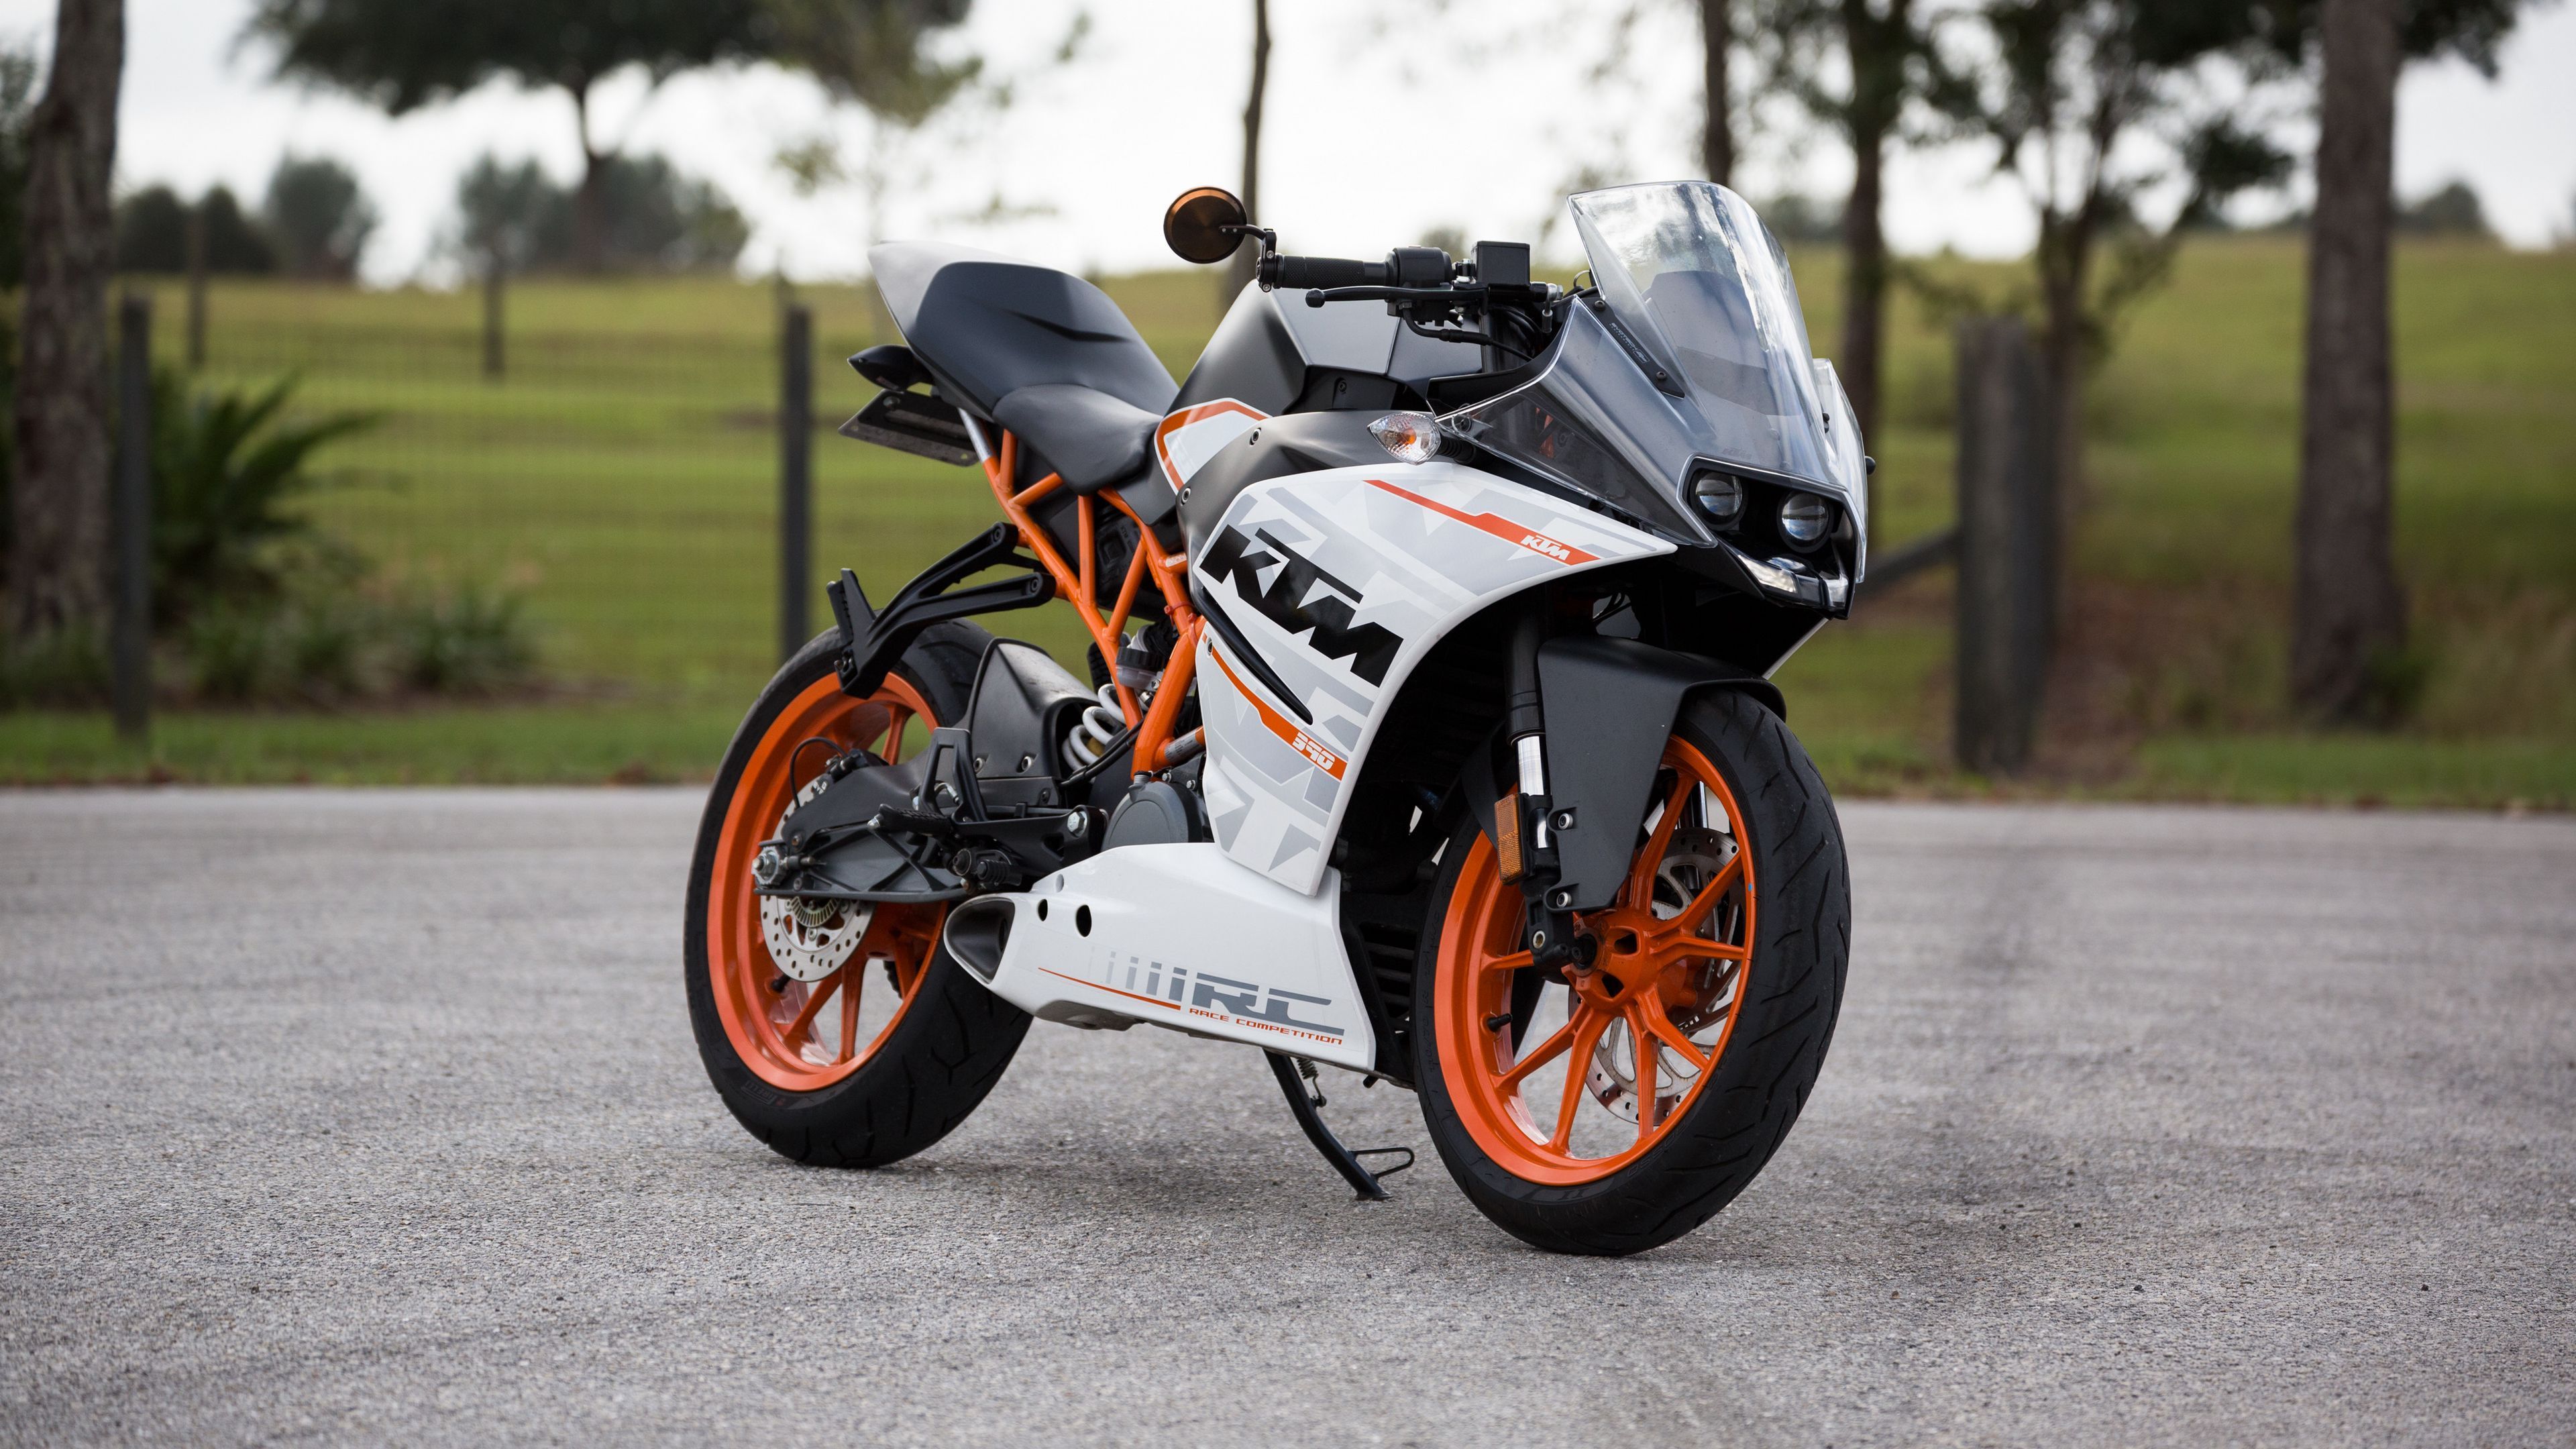 Download wallpaper 3840x2160 ktm, motorcycle, side view 4k uhd 16:9 HD background